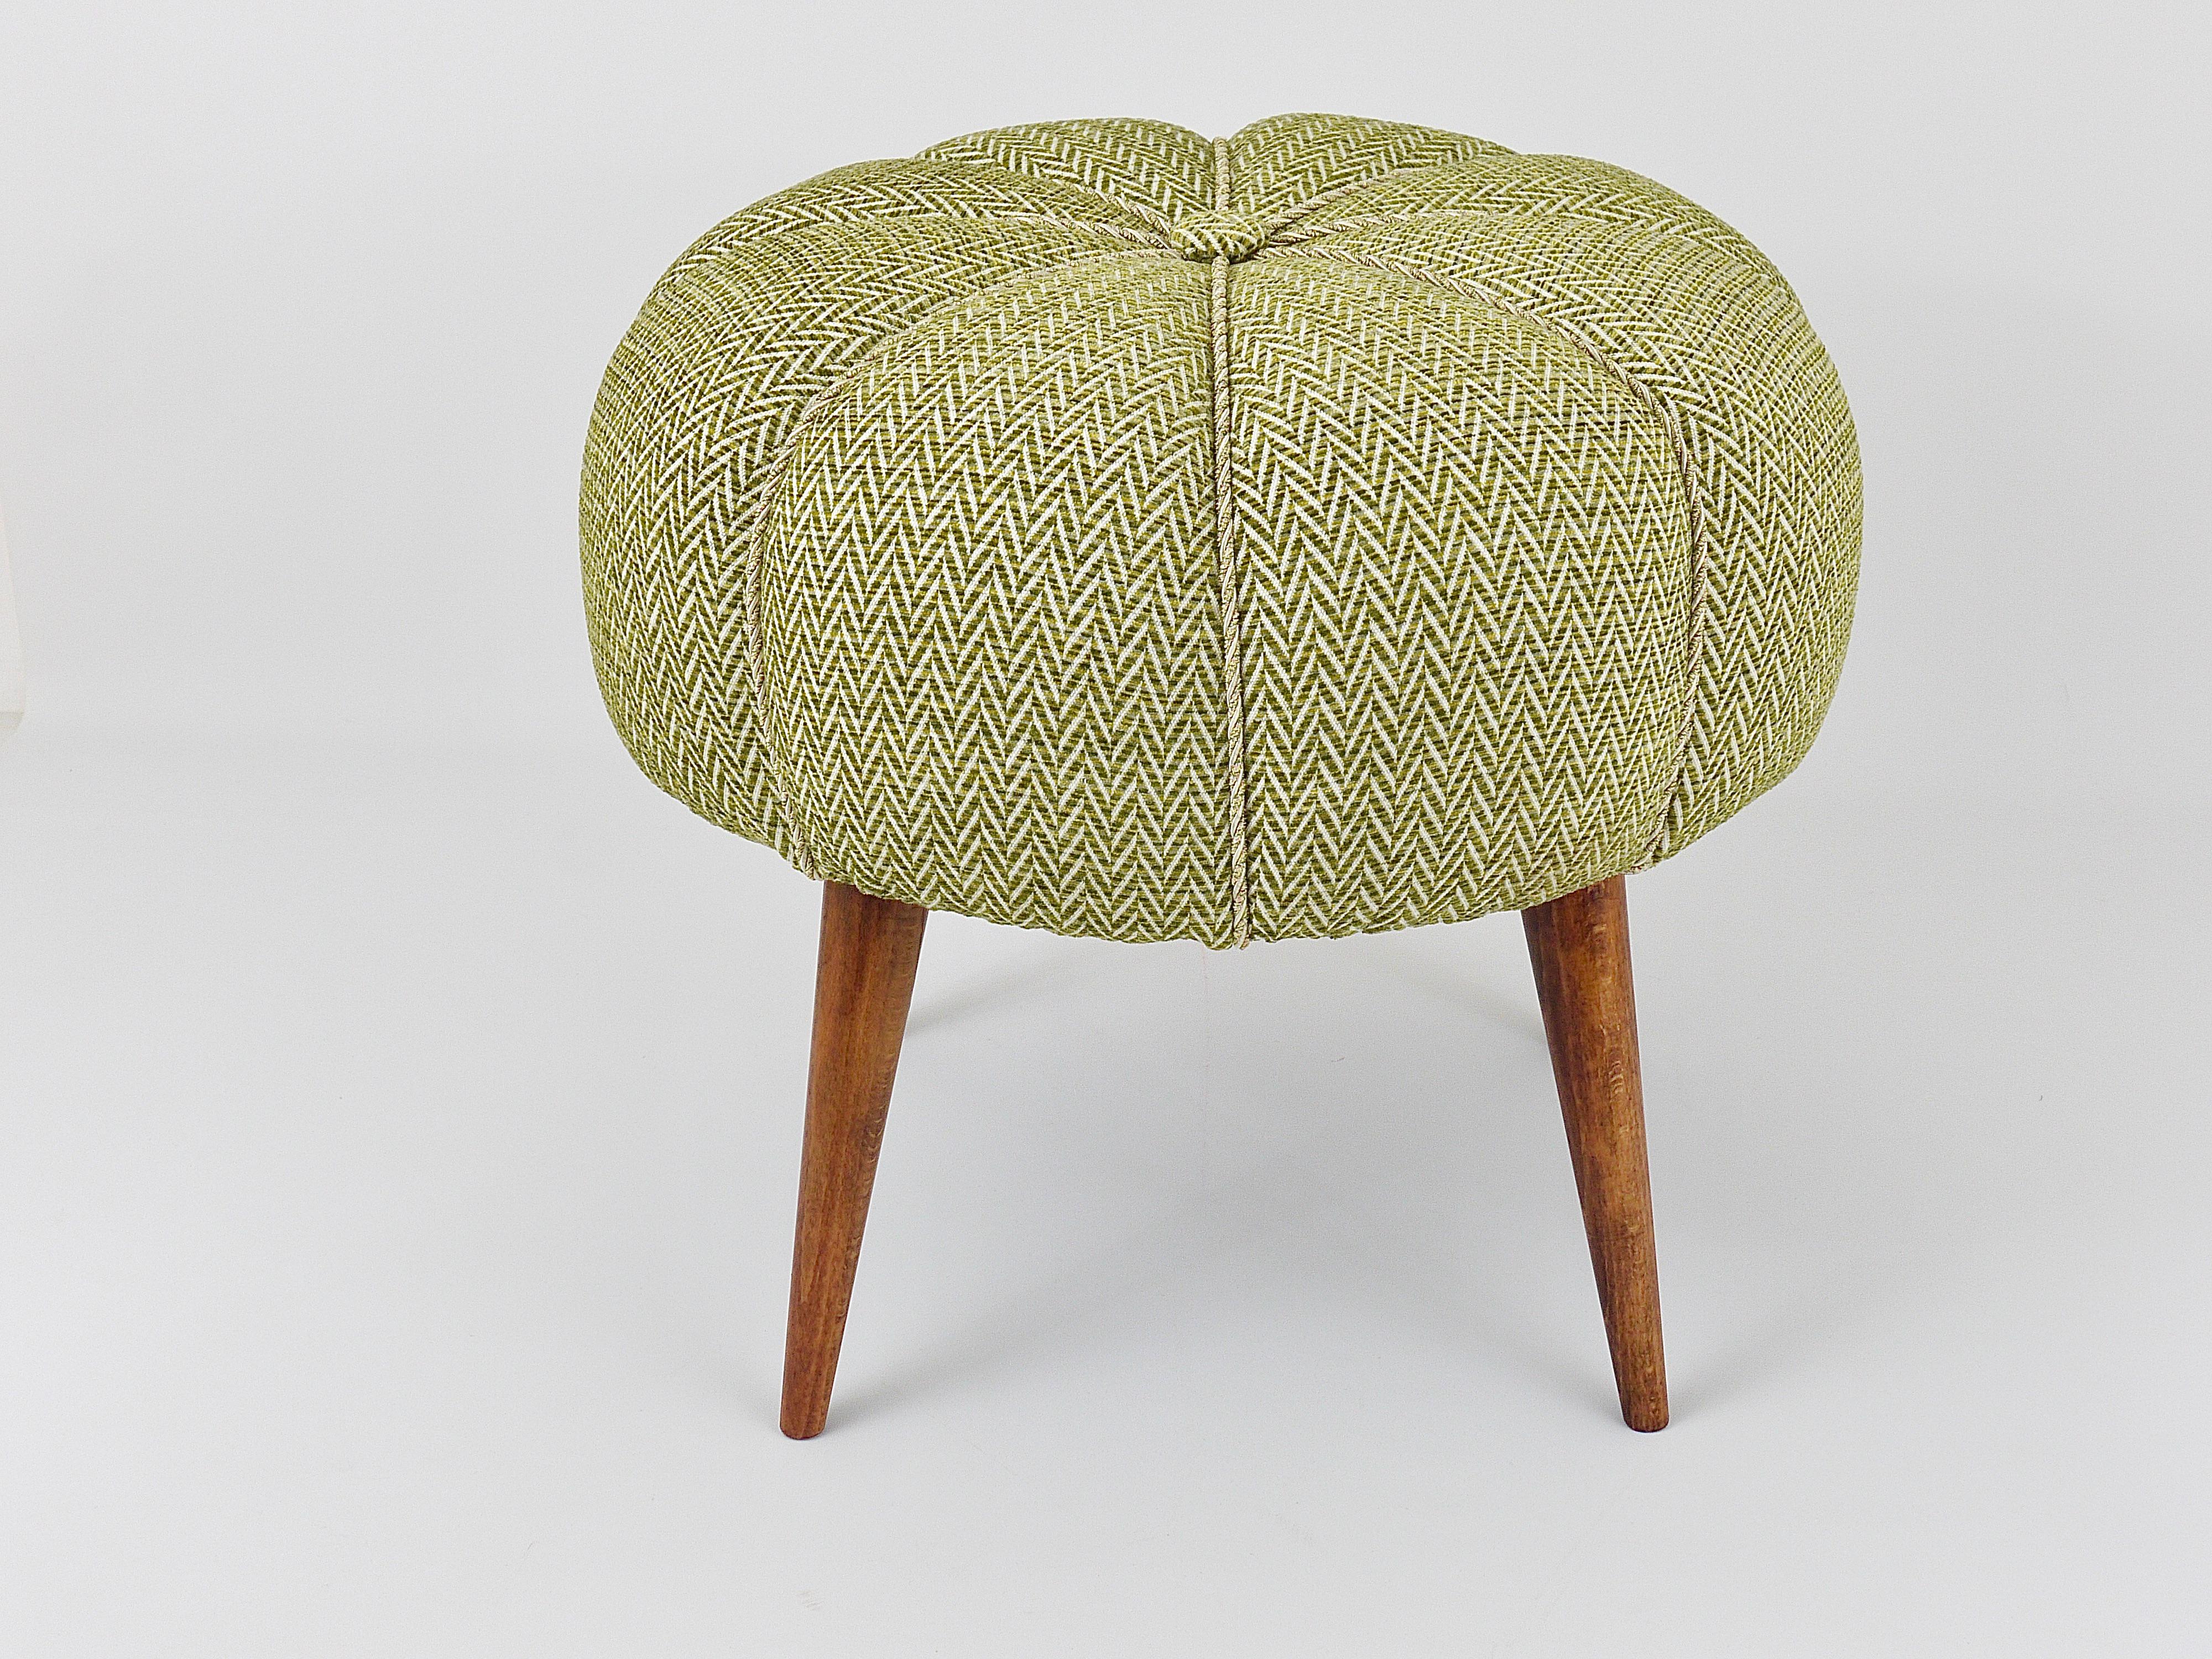 Up to Six Charming Zigzag Midcentury Stools, Pouf, Ottoman, Footstool, 1950s For Sale 3